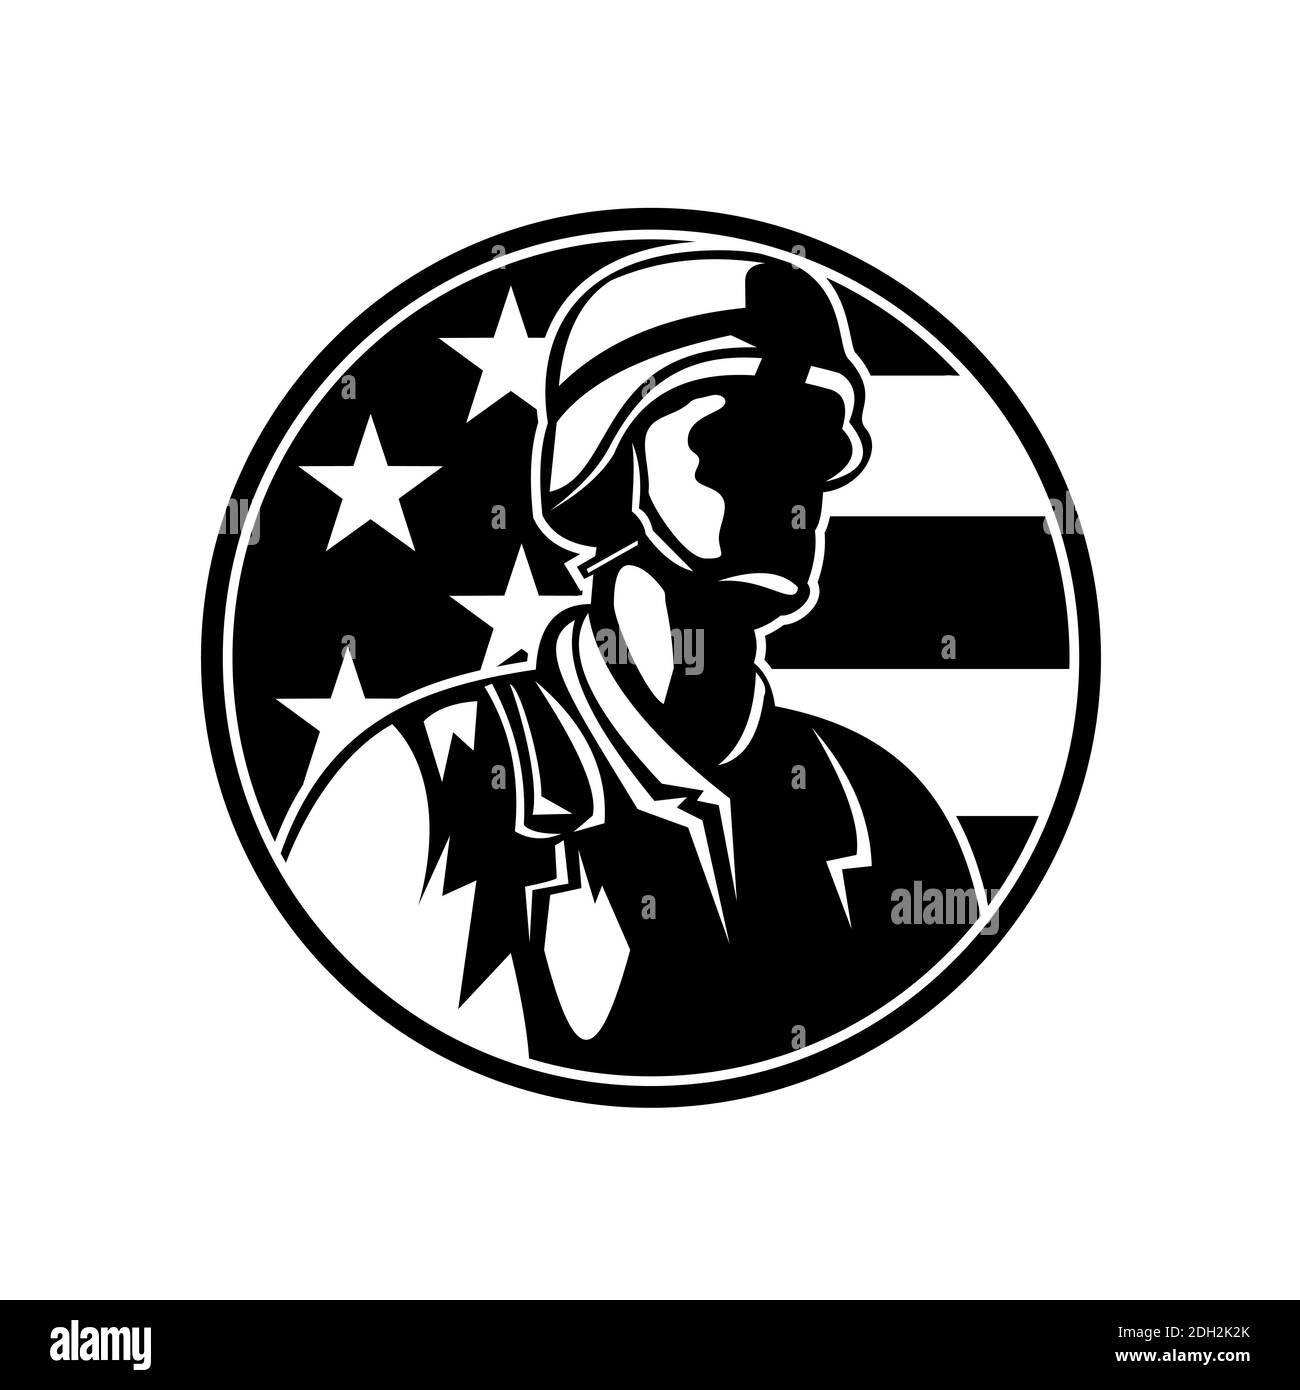 American Soldier Military Serviceman Looking Side USA Stars and Stripes Flag Circle Retro Black and White Stock Photo